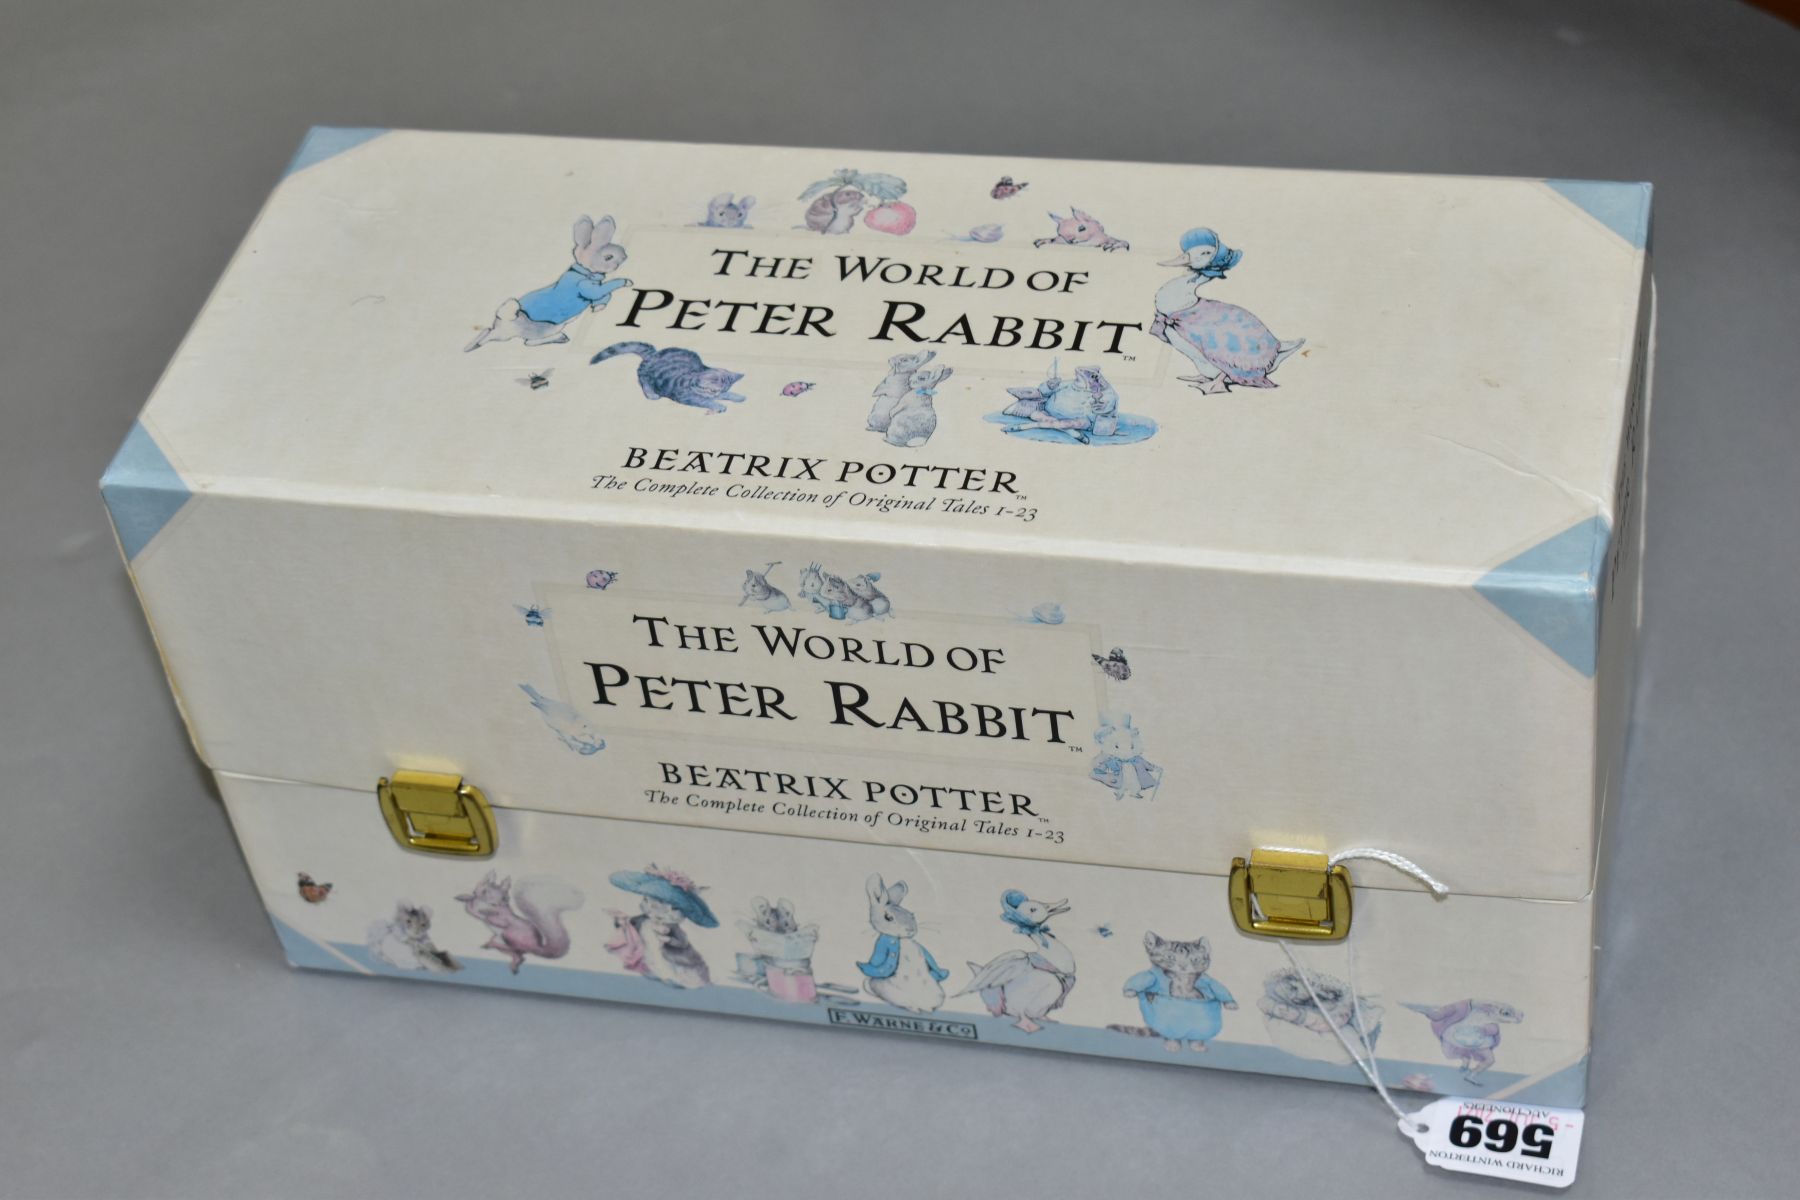 AN INCOMPLETE BOXED SET OF BEATRIX POTTER 'THE WORLD OF PETER RABBIT' COLLECTION OF ORIGINAL - Image 2 of 2